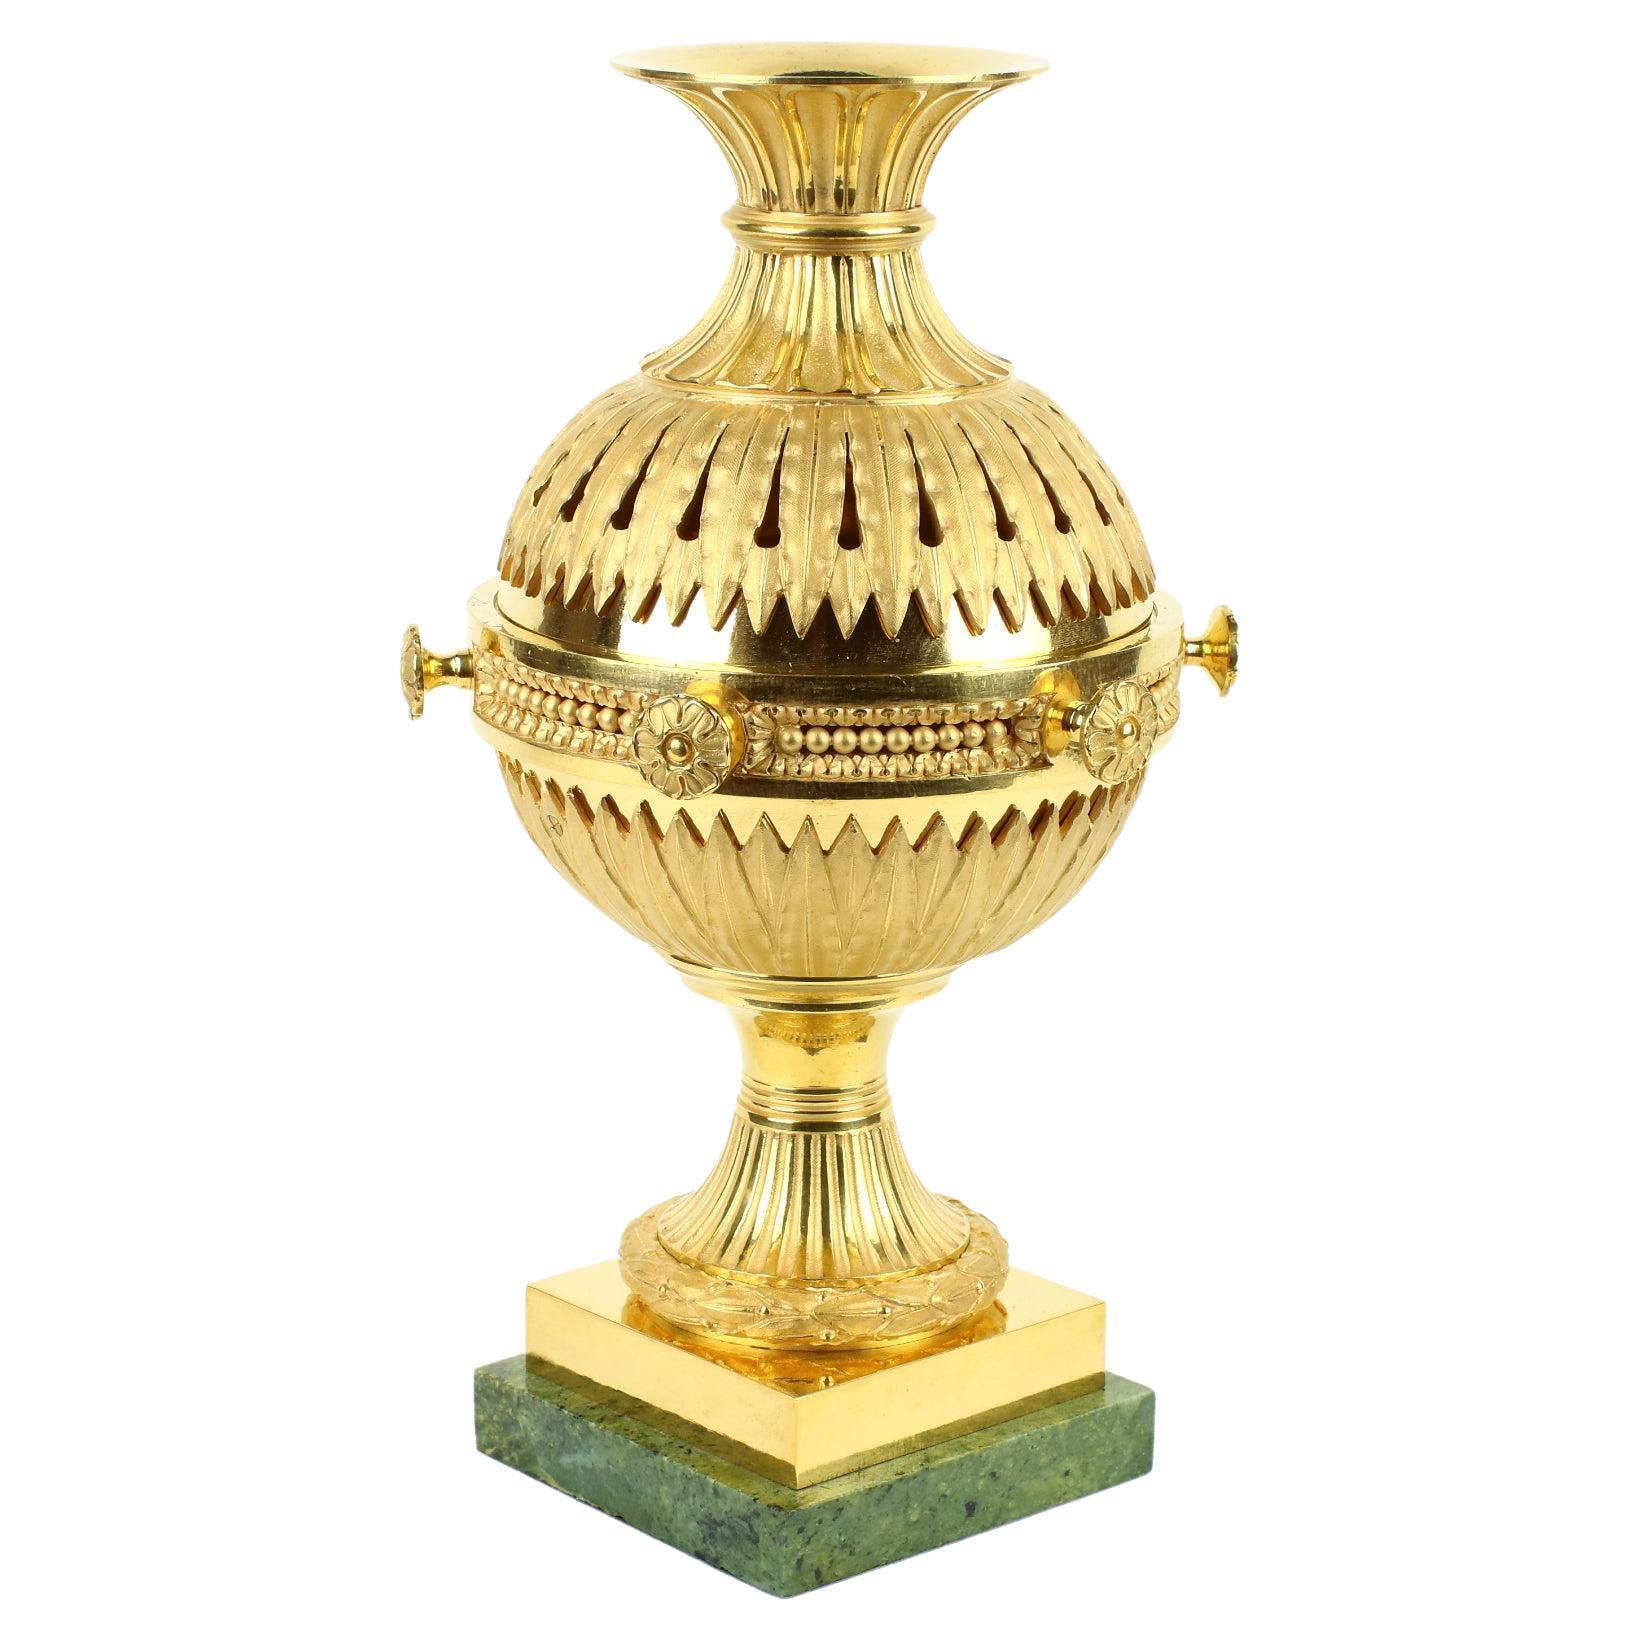 French Late 18thh Century Louis XVI Gilt Bronze Incense Burner or Brule Parfum